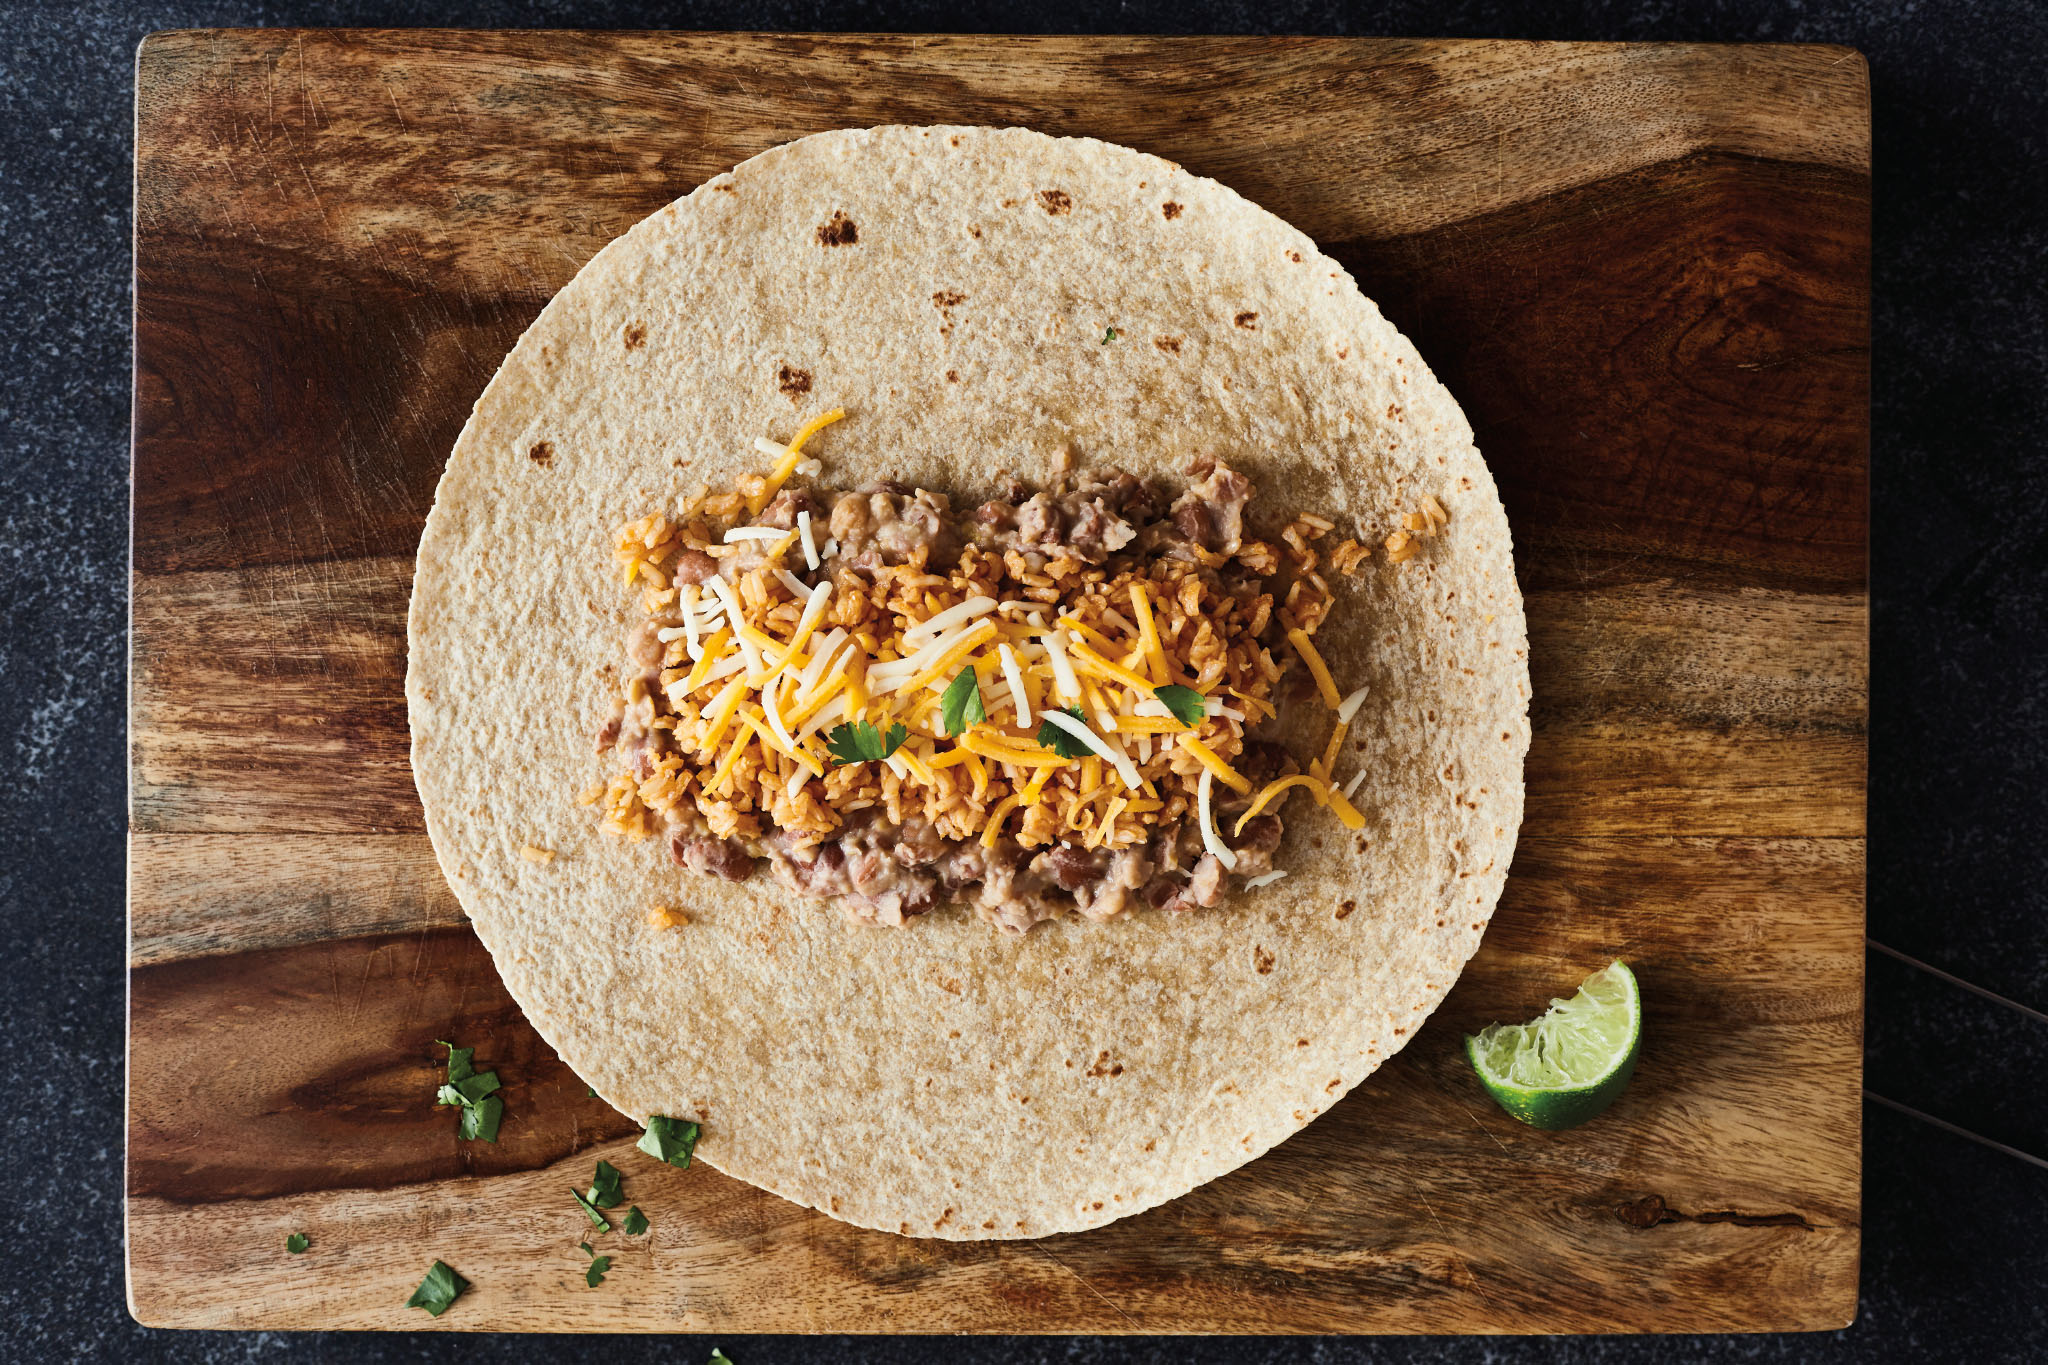 An image for the recipe to make bean, rice, and cheese burritos.